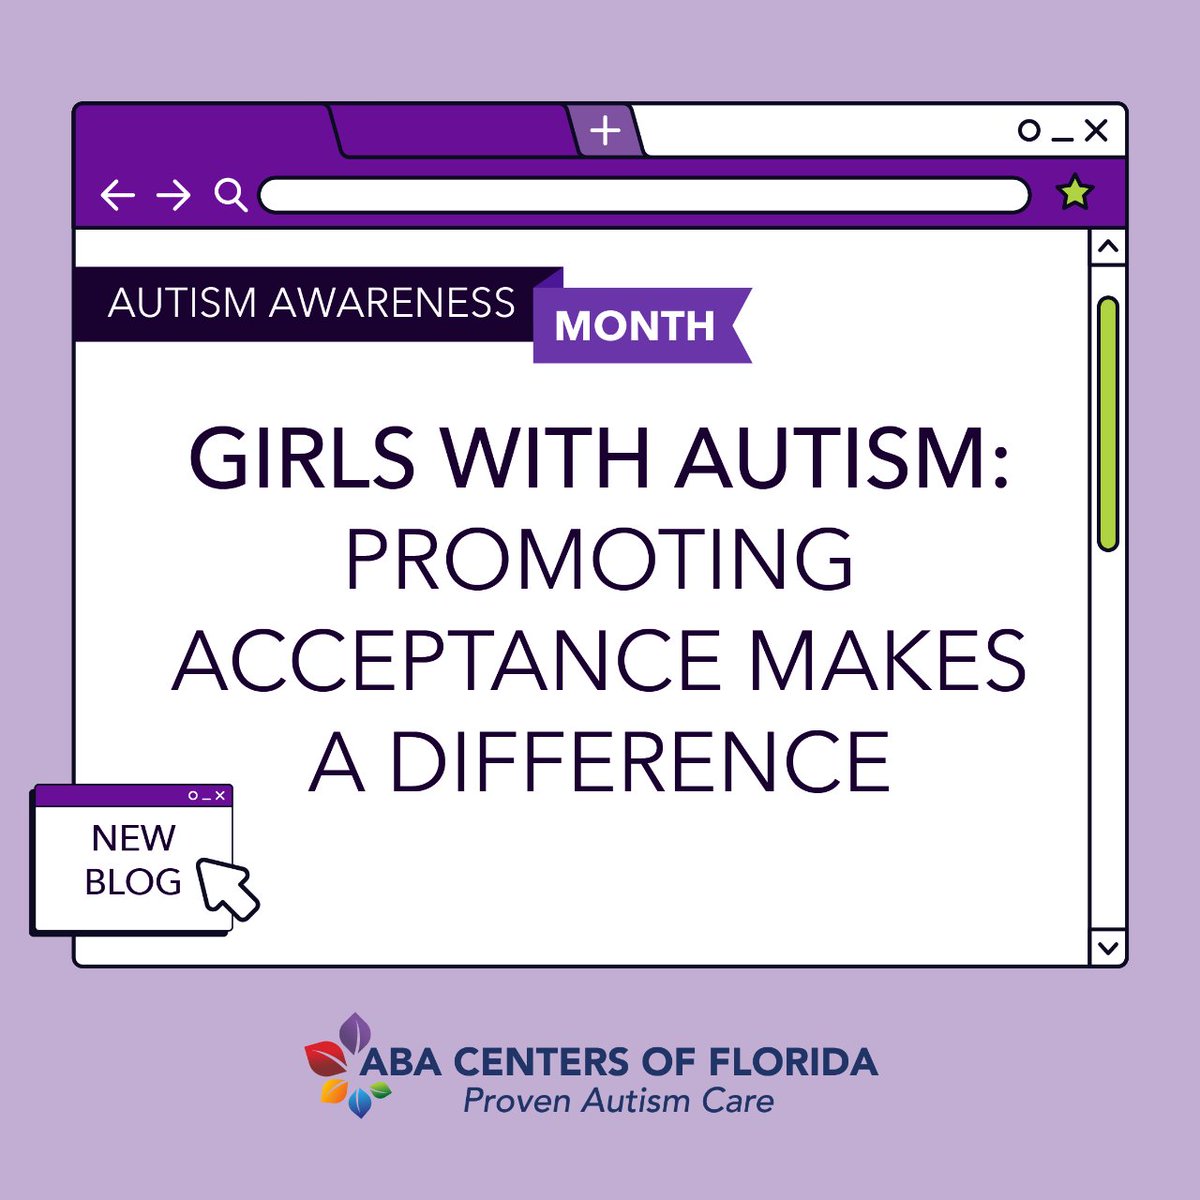 Explore the underdiagnosis of girls with autism and how to support them in our blog. Read 'Girls with Autism: Promoting Acceptance Makes a Difference' here: bit.ly/abacfba043024x.

#ABACentersOfFlorida #BlogPost #NewArticle #ABABlog #ABATherapy